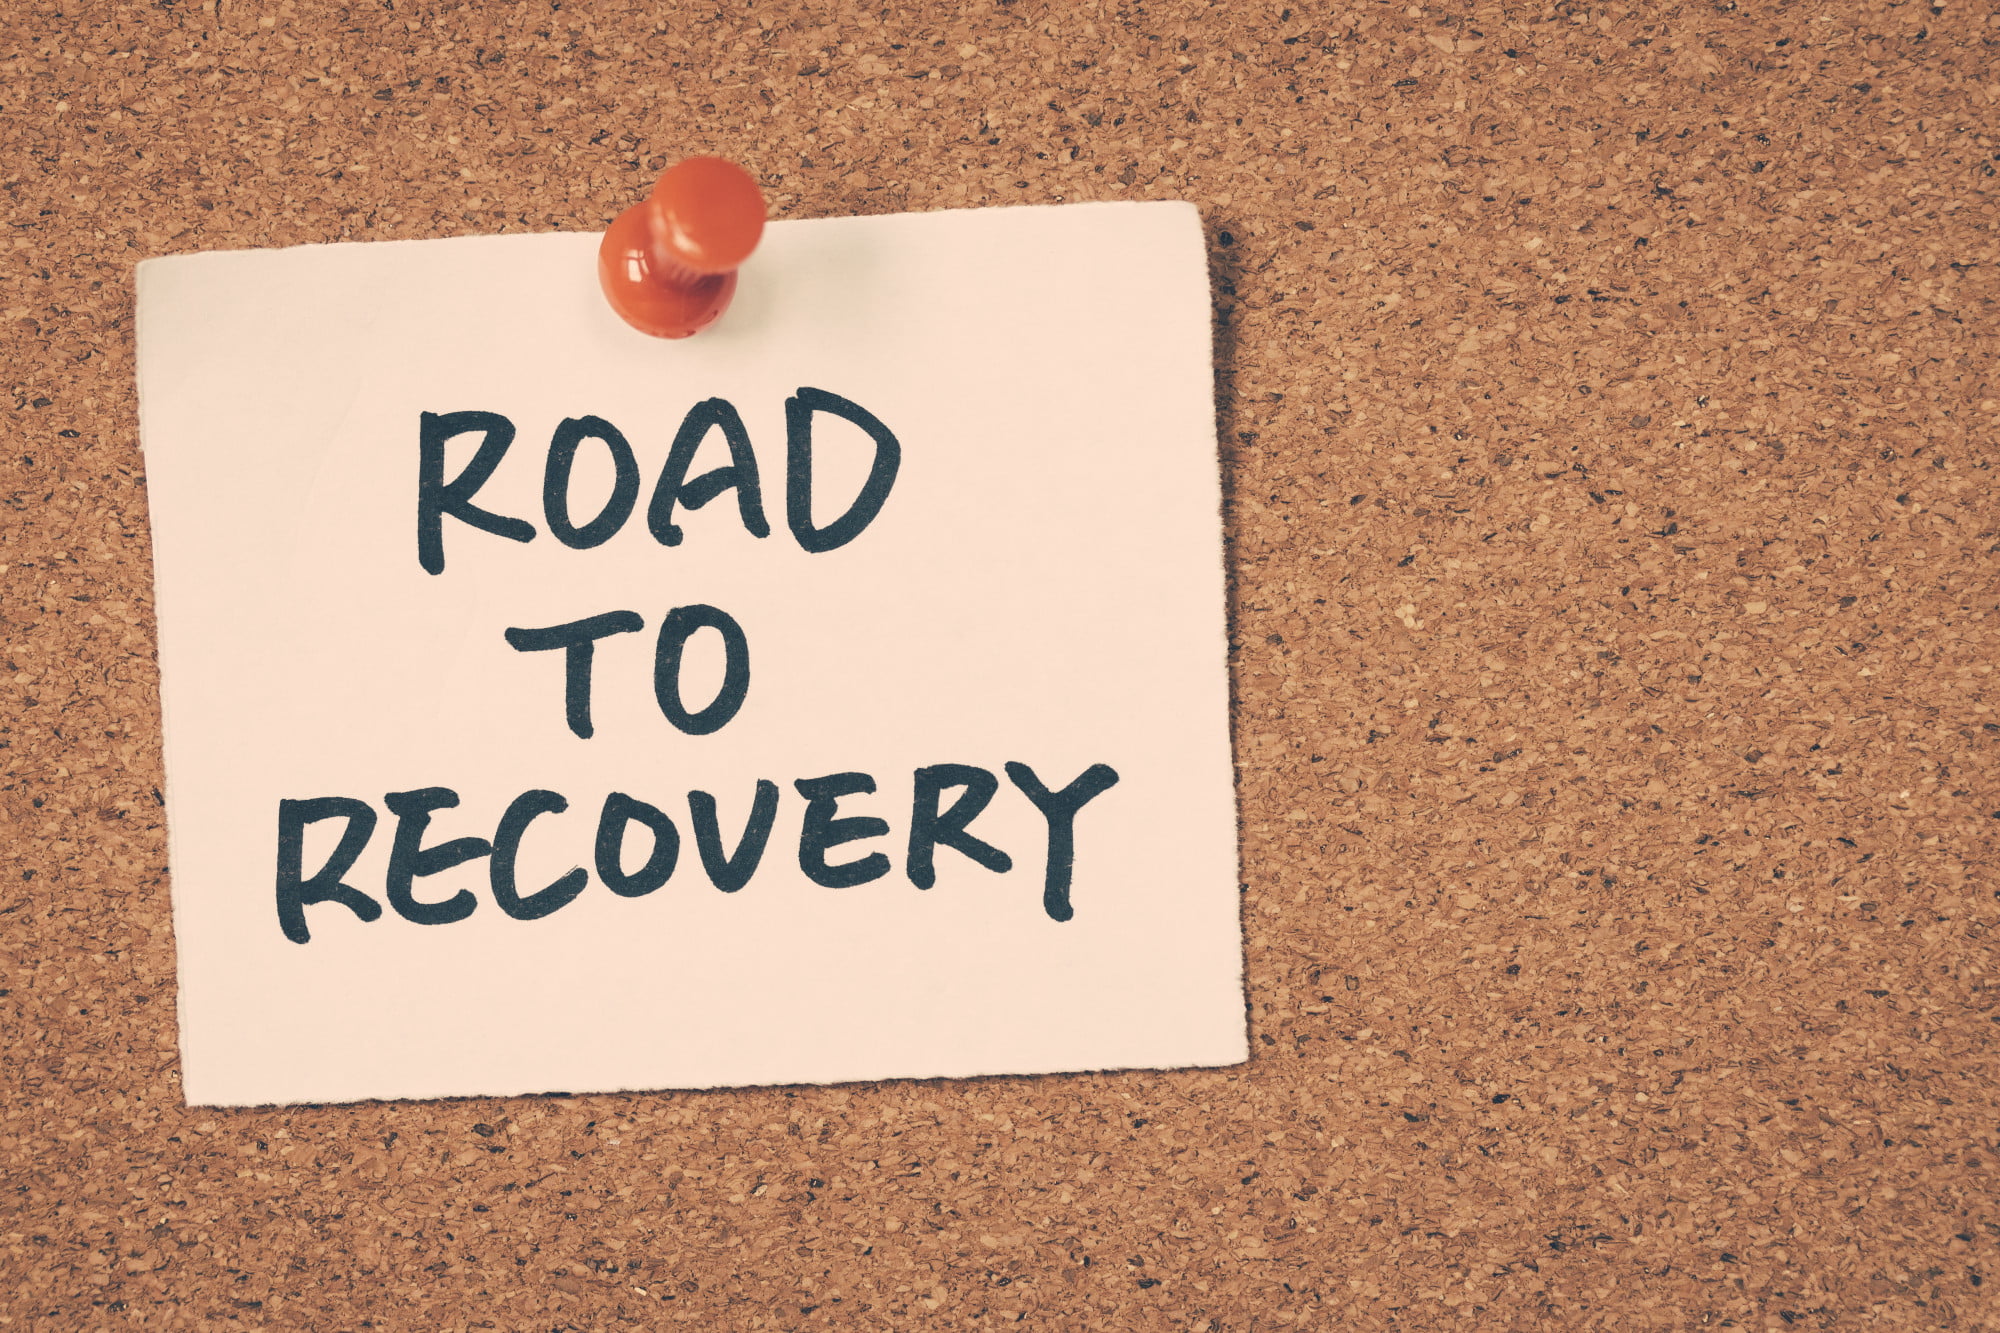 For many people, the hard work begins after leaving rehab. This is what you can do to stay sober and live a fulfilling life outside of rehab.